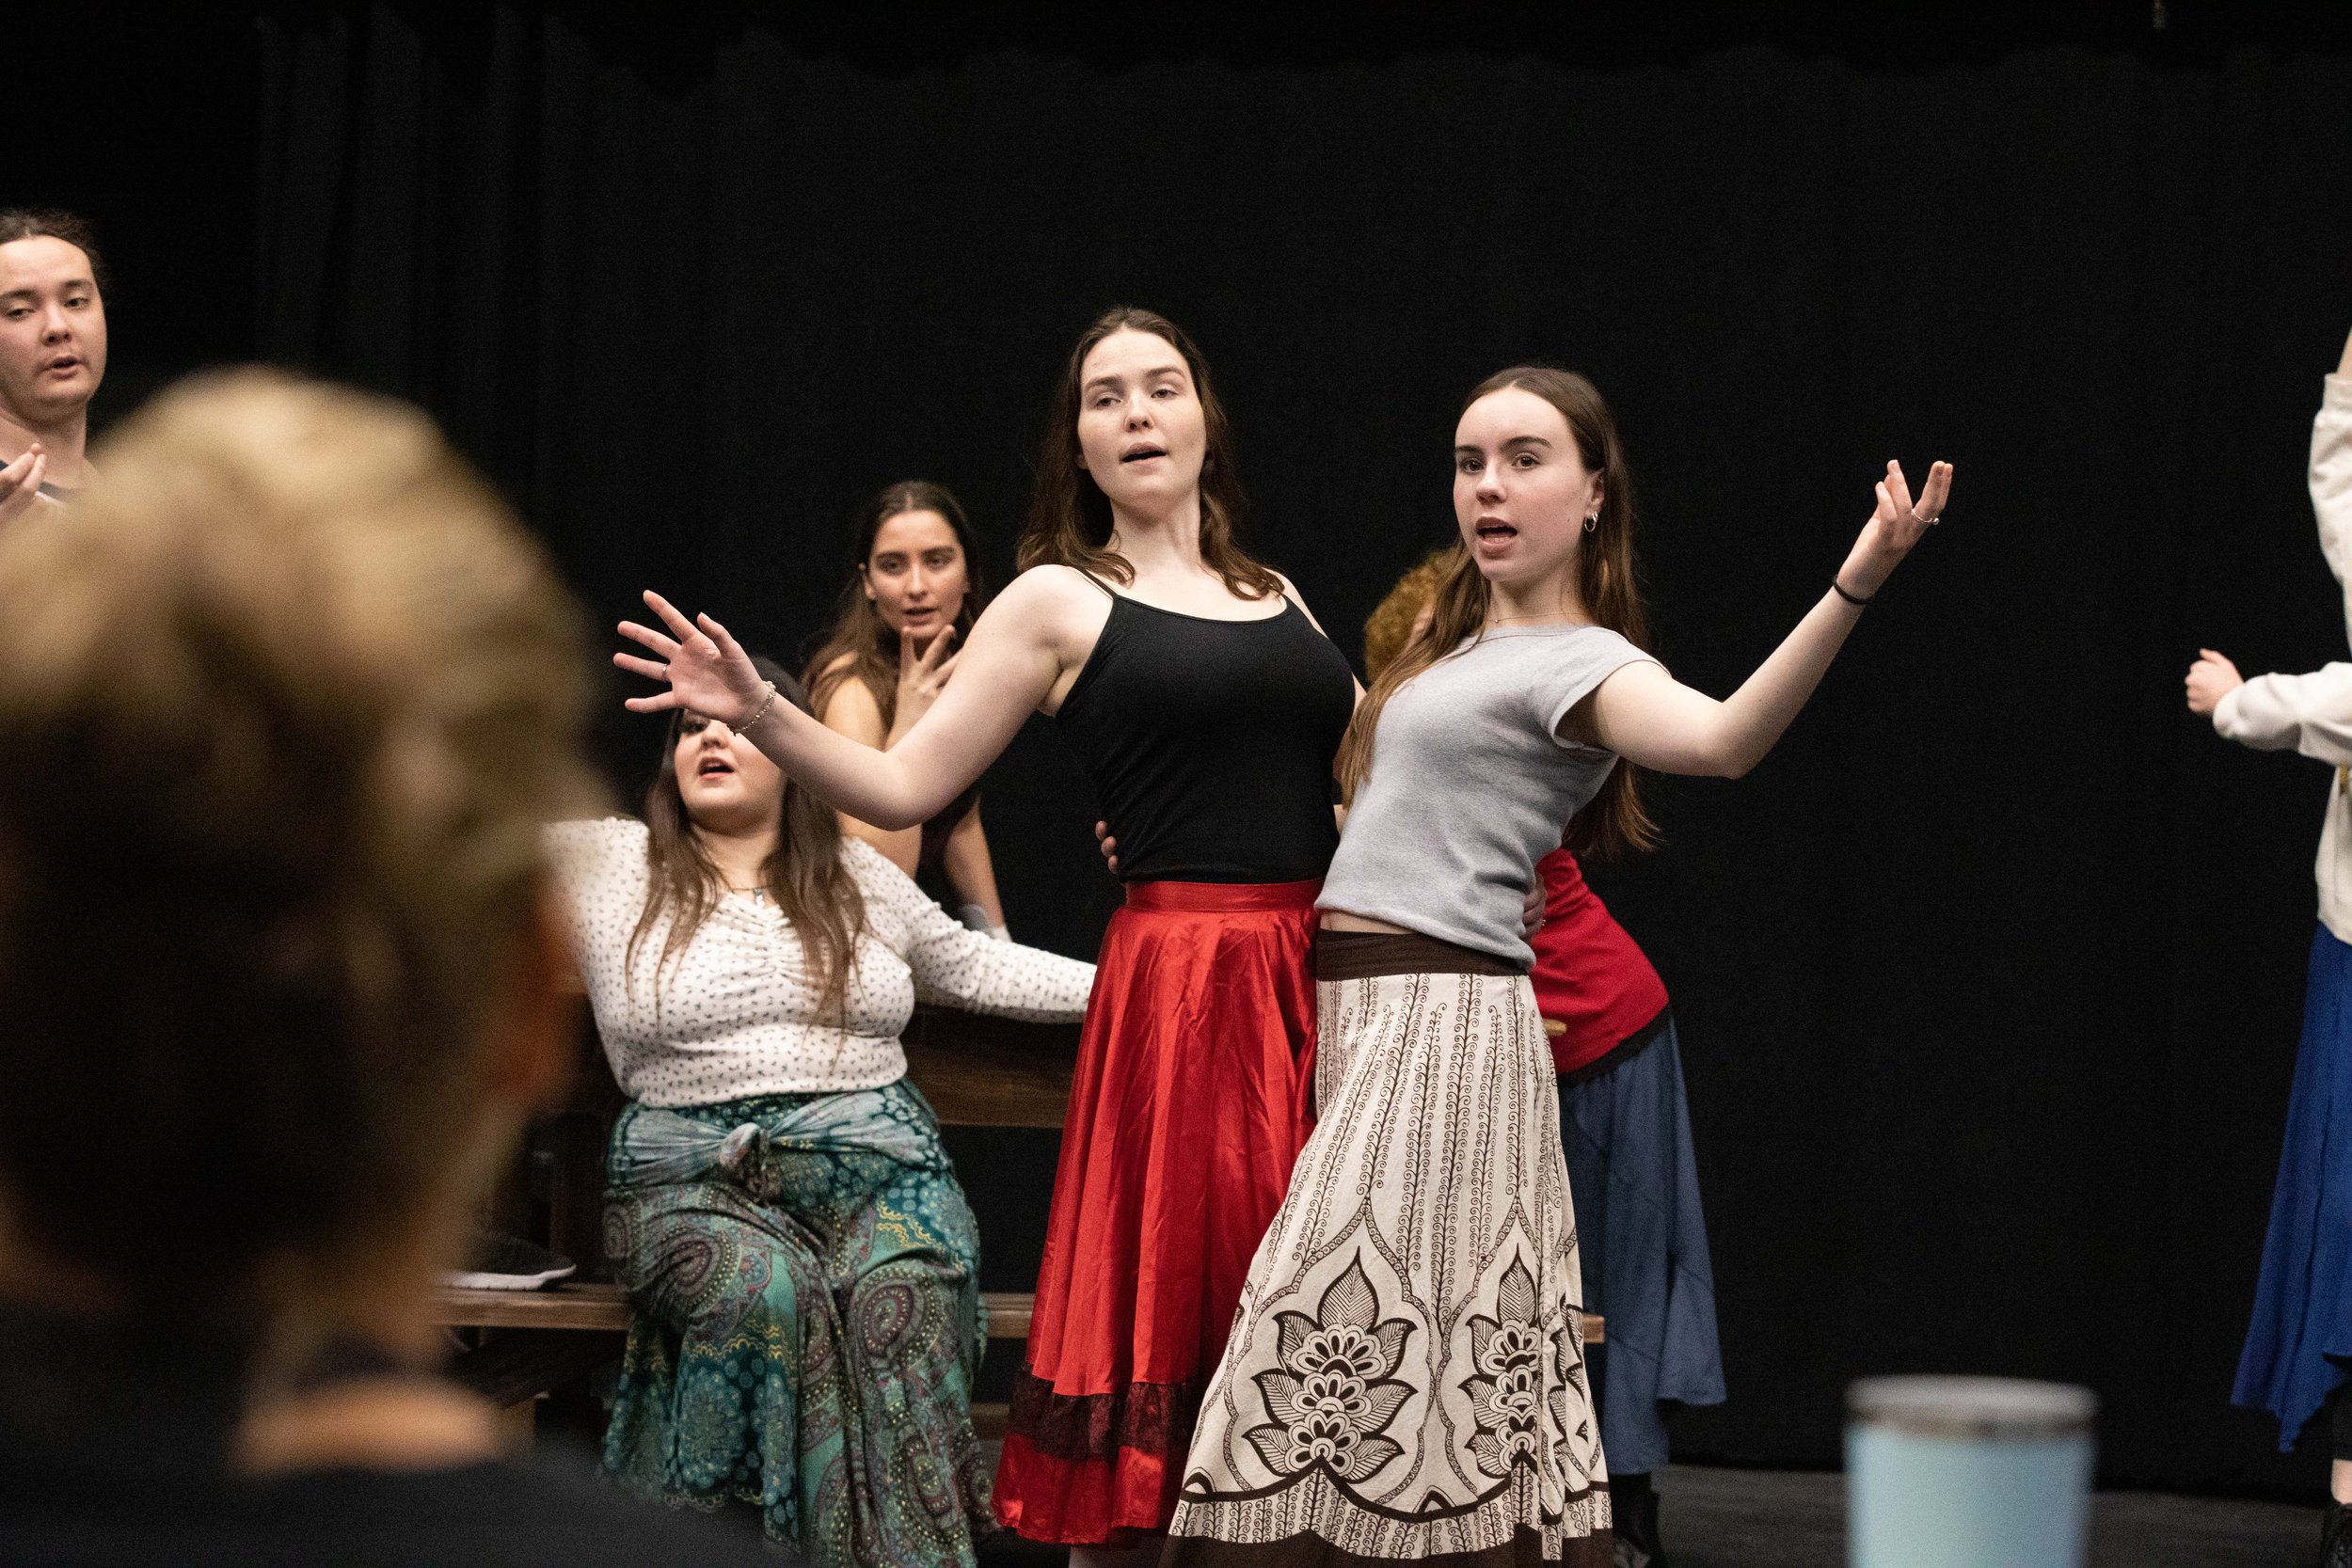  SMC theater students performing at a class rehearsal for the musical “Hunchback of Notredame”. In the foreground, Flamenco Choreographer Cihtli Ocampo. Theater Arts building at SMC main campus, Santa Monica, Calif. March Tuesday 7, 2023. (Jorge Devo